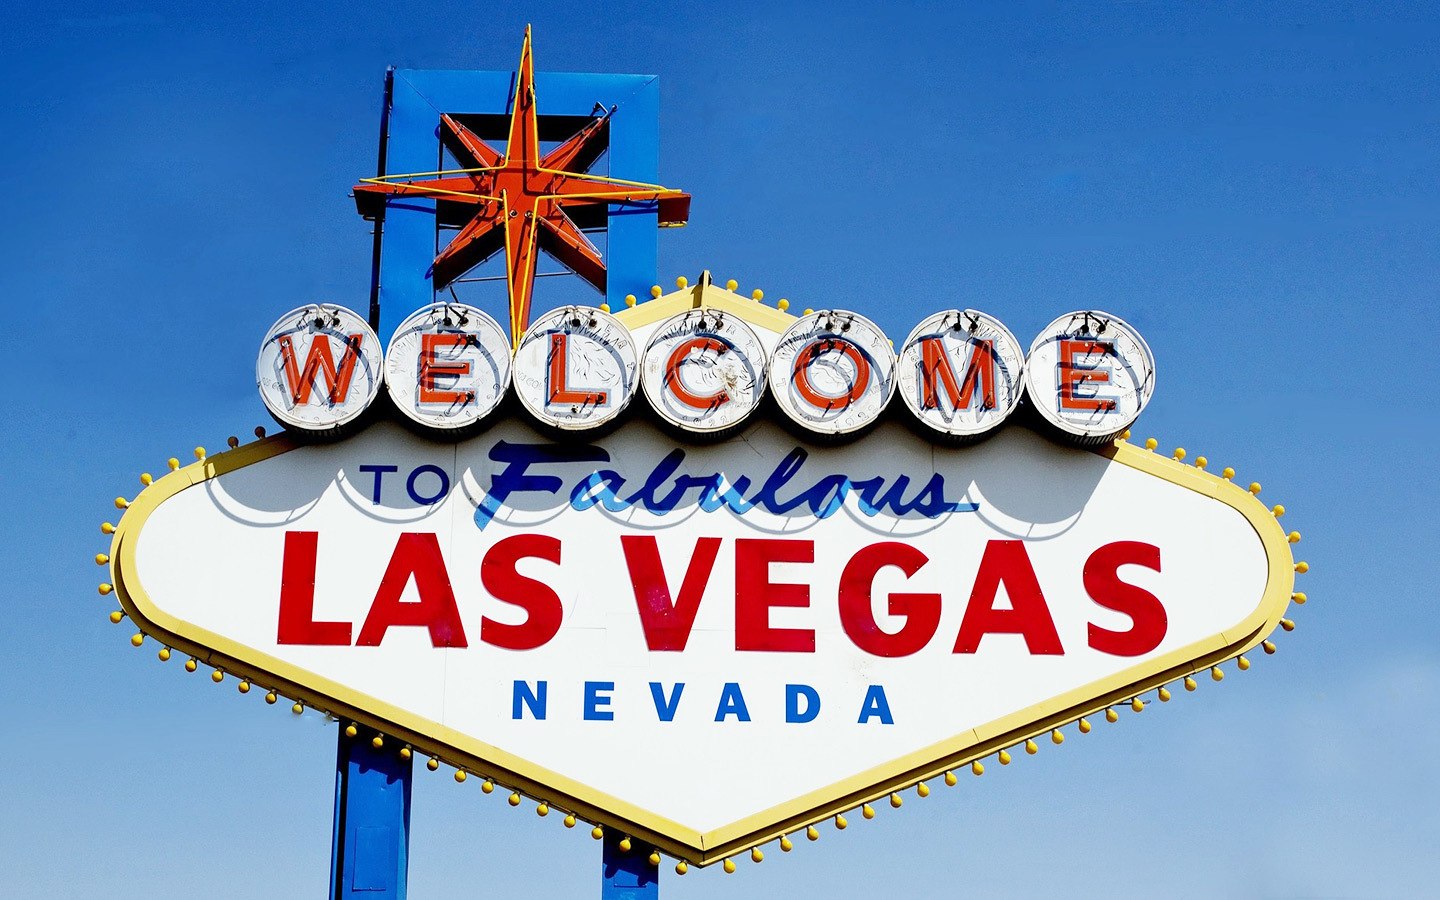 The Welcome to Las Vegas sign, Nevada USA